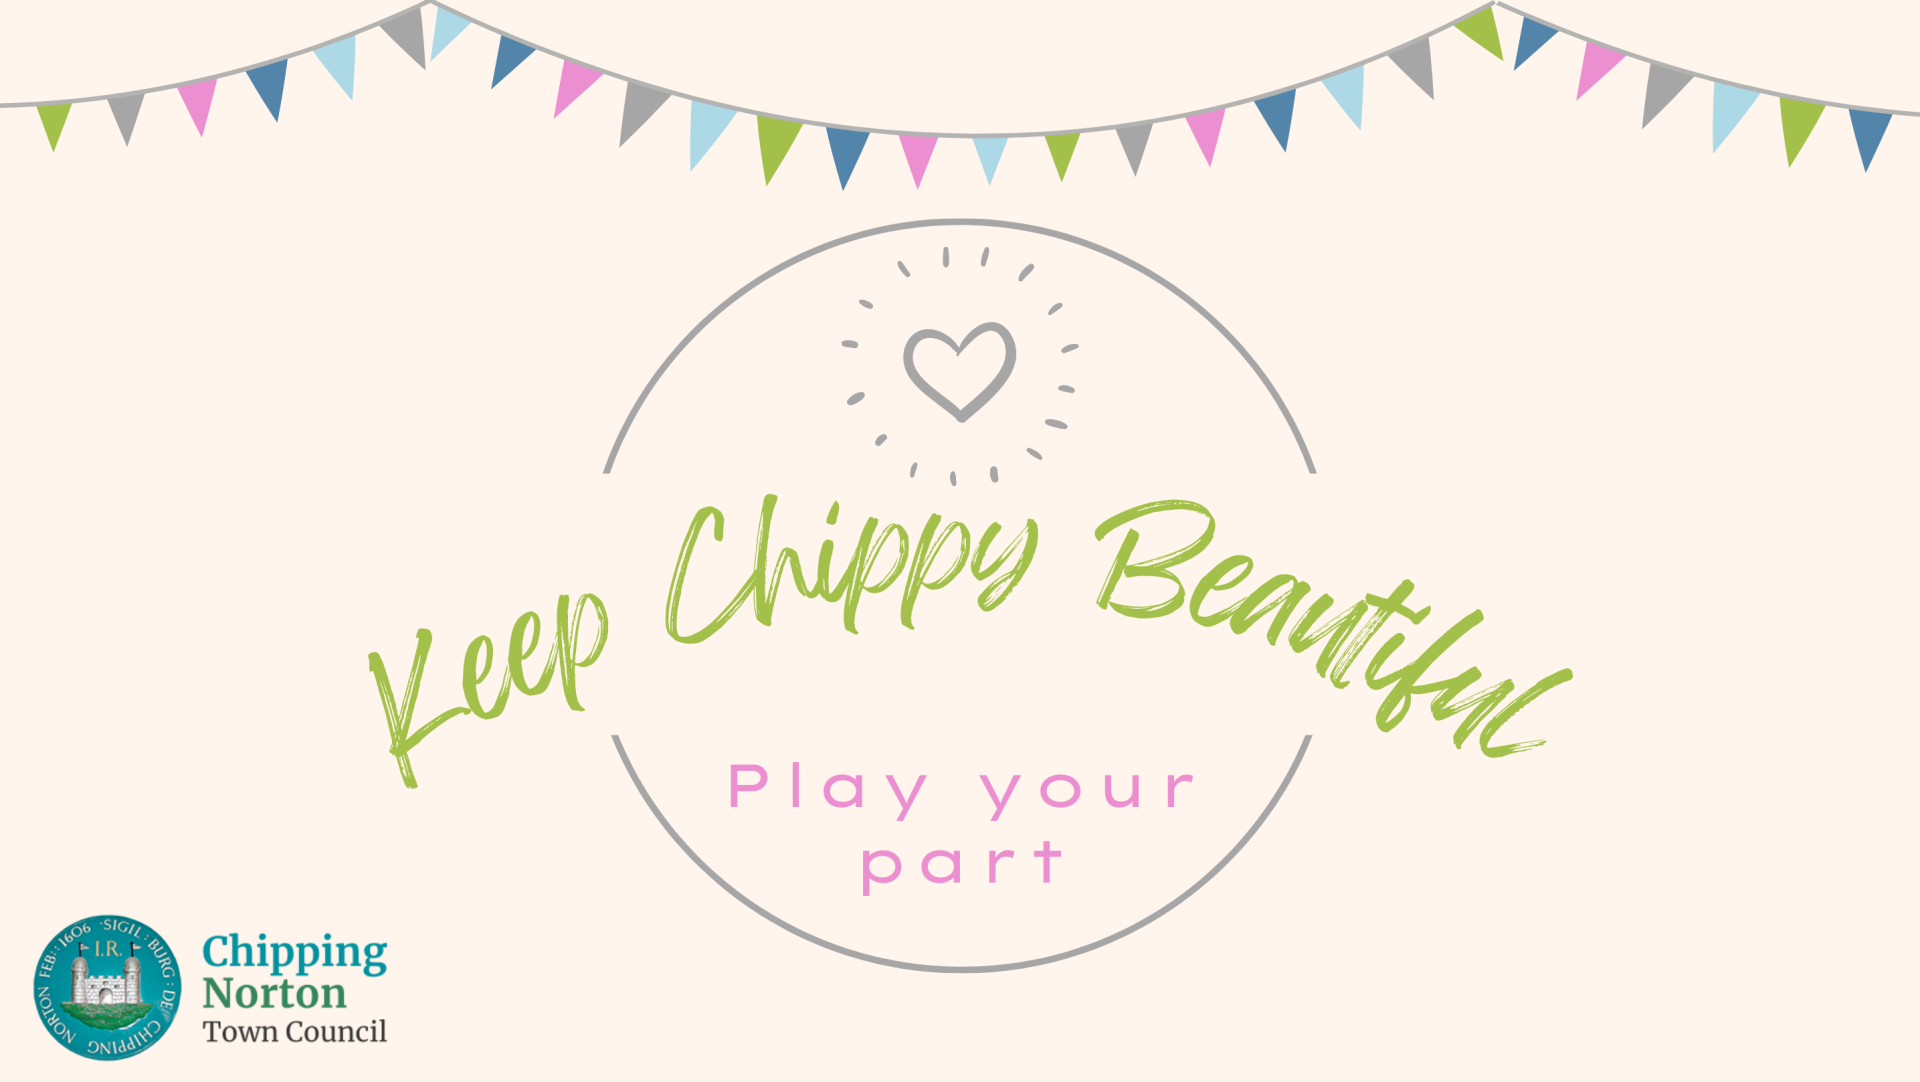 Keep Chippy Beautiful
Play your part 
Graphic